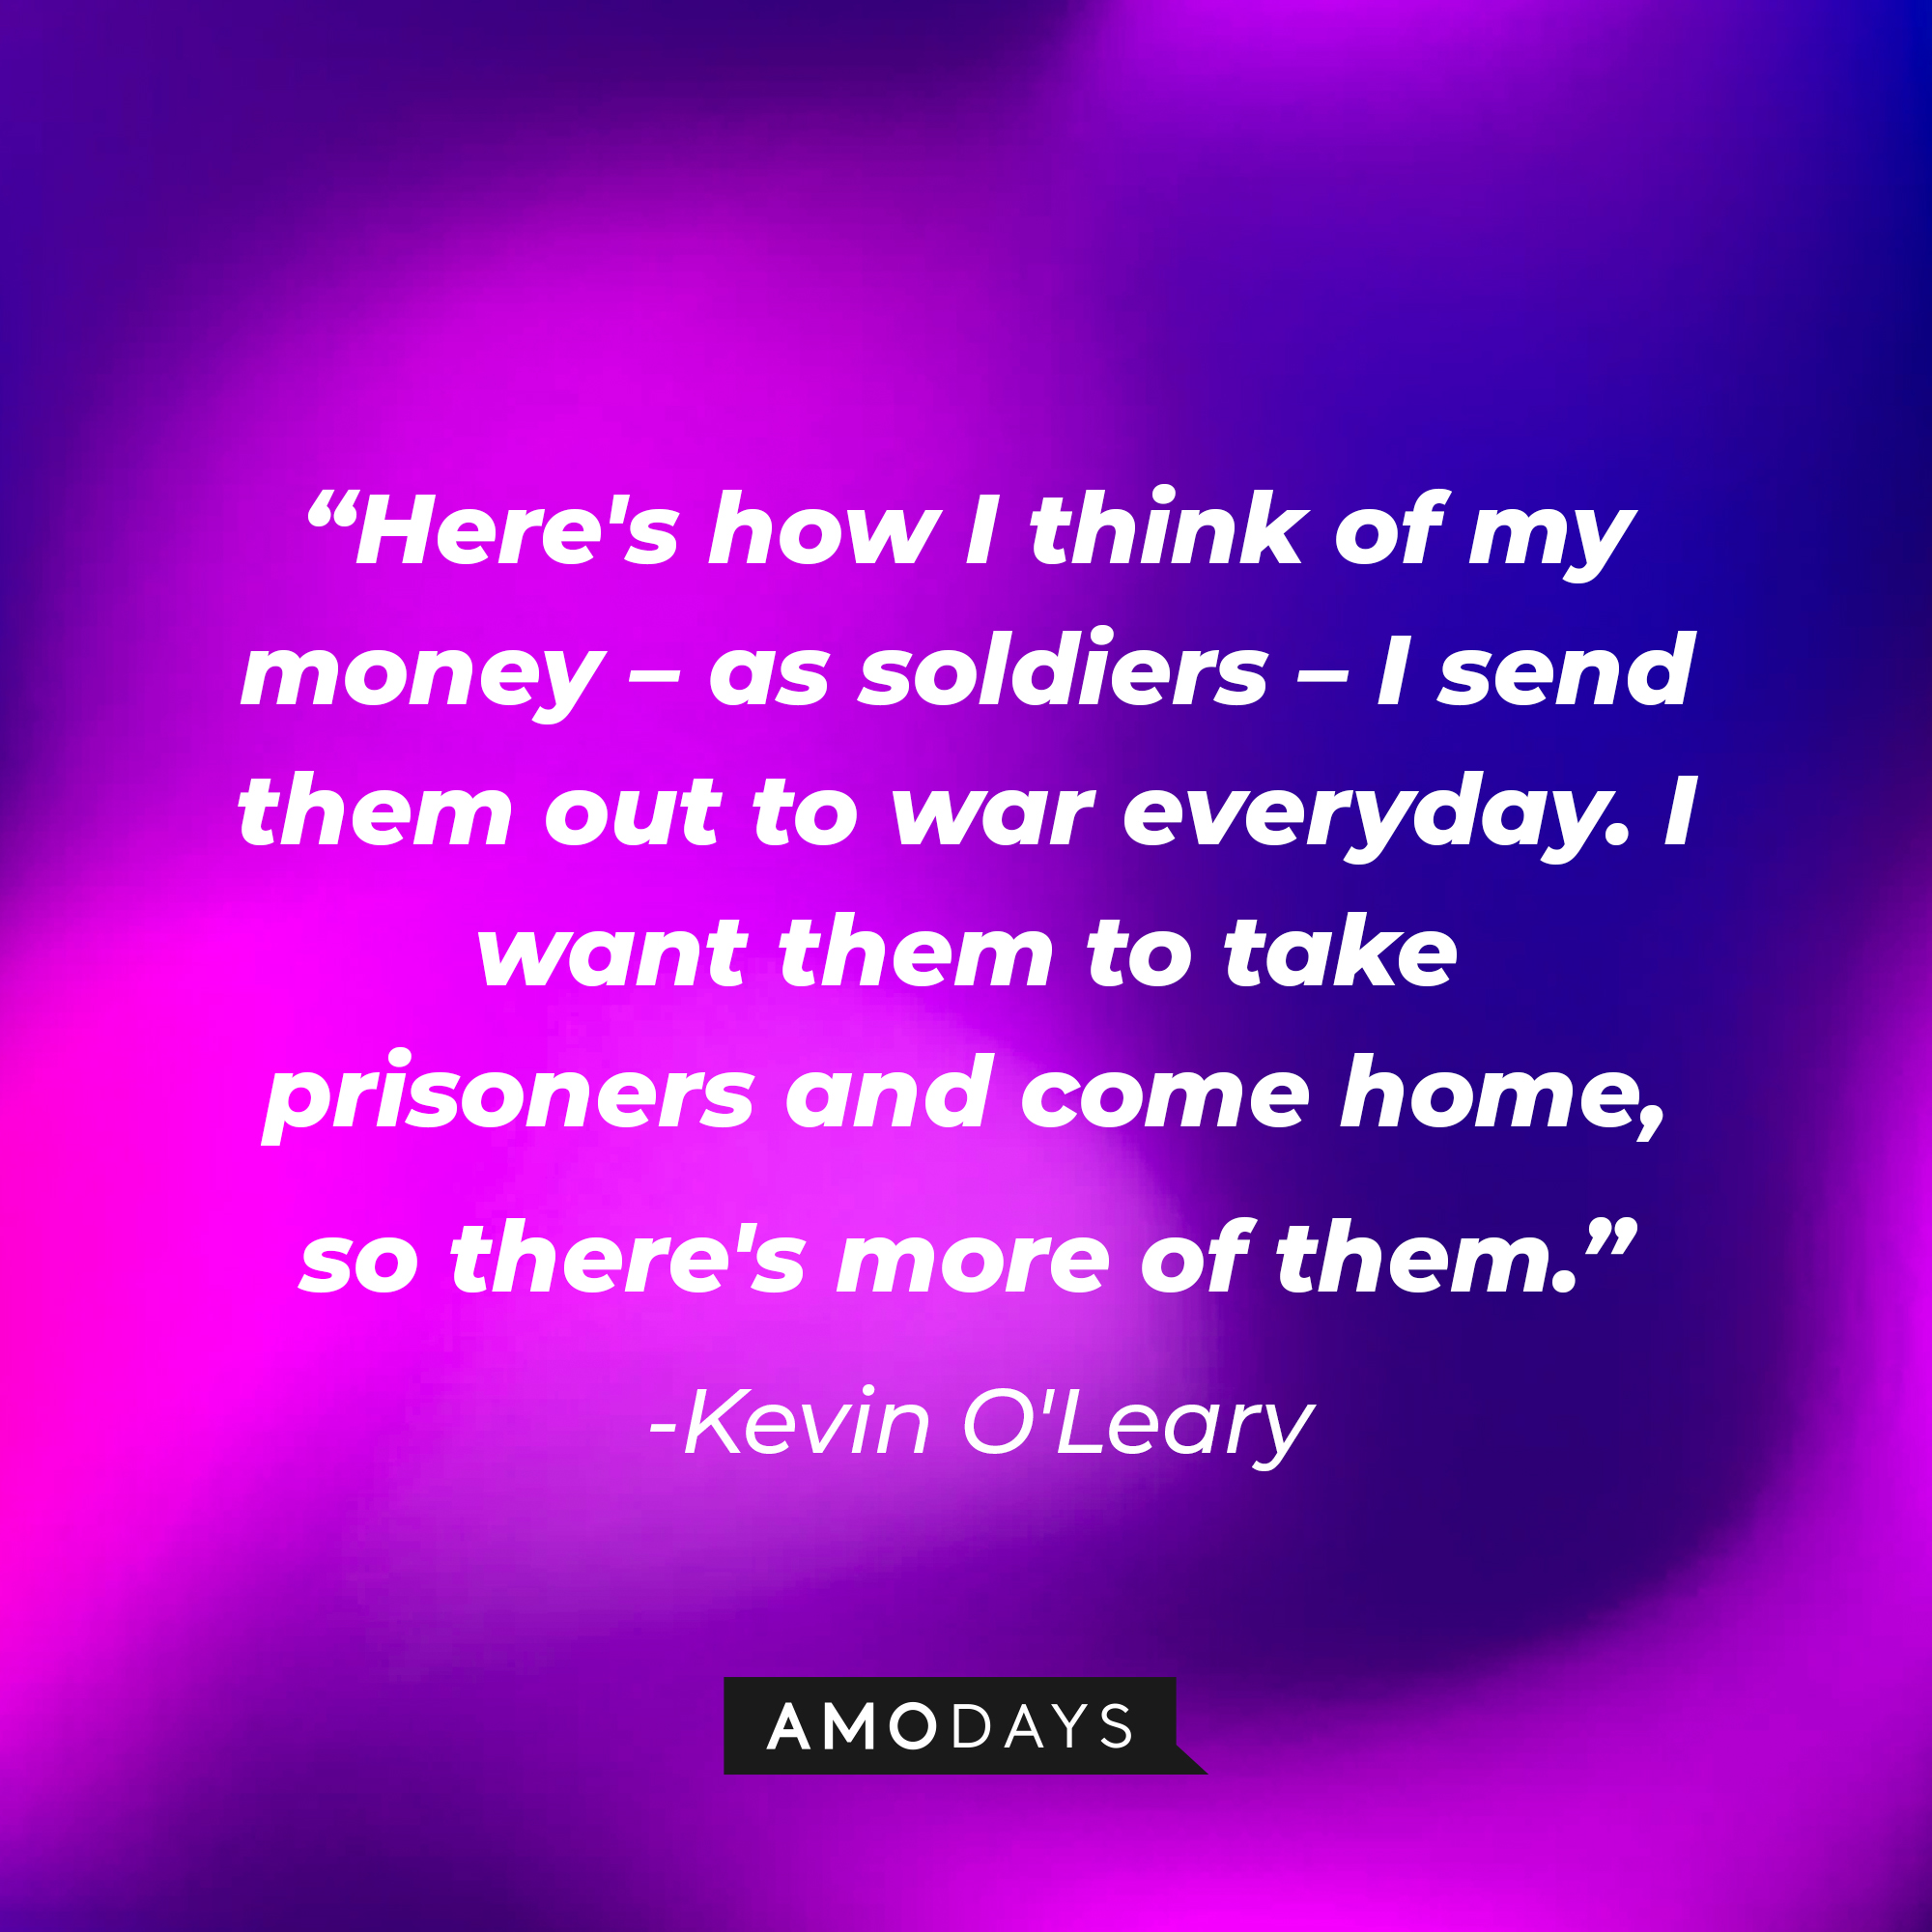 A photo with Kevin O'Leary's quote, "Here's how I think of my money – as soldiers – I send them out to war everyday. I want them to take prisoners and come home, so there's more of them." | Source: Amodays